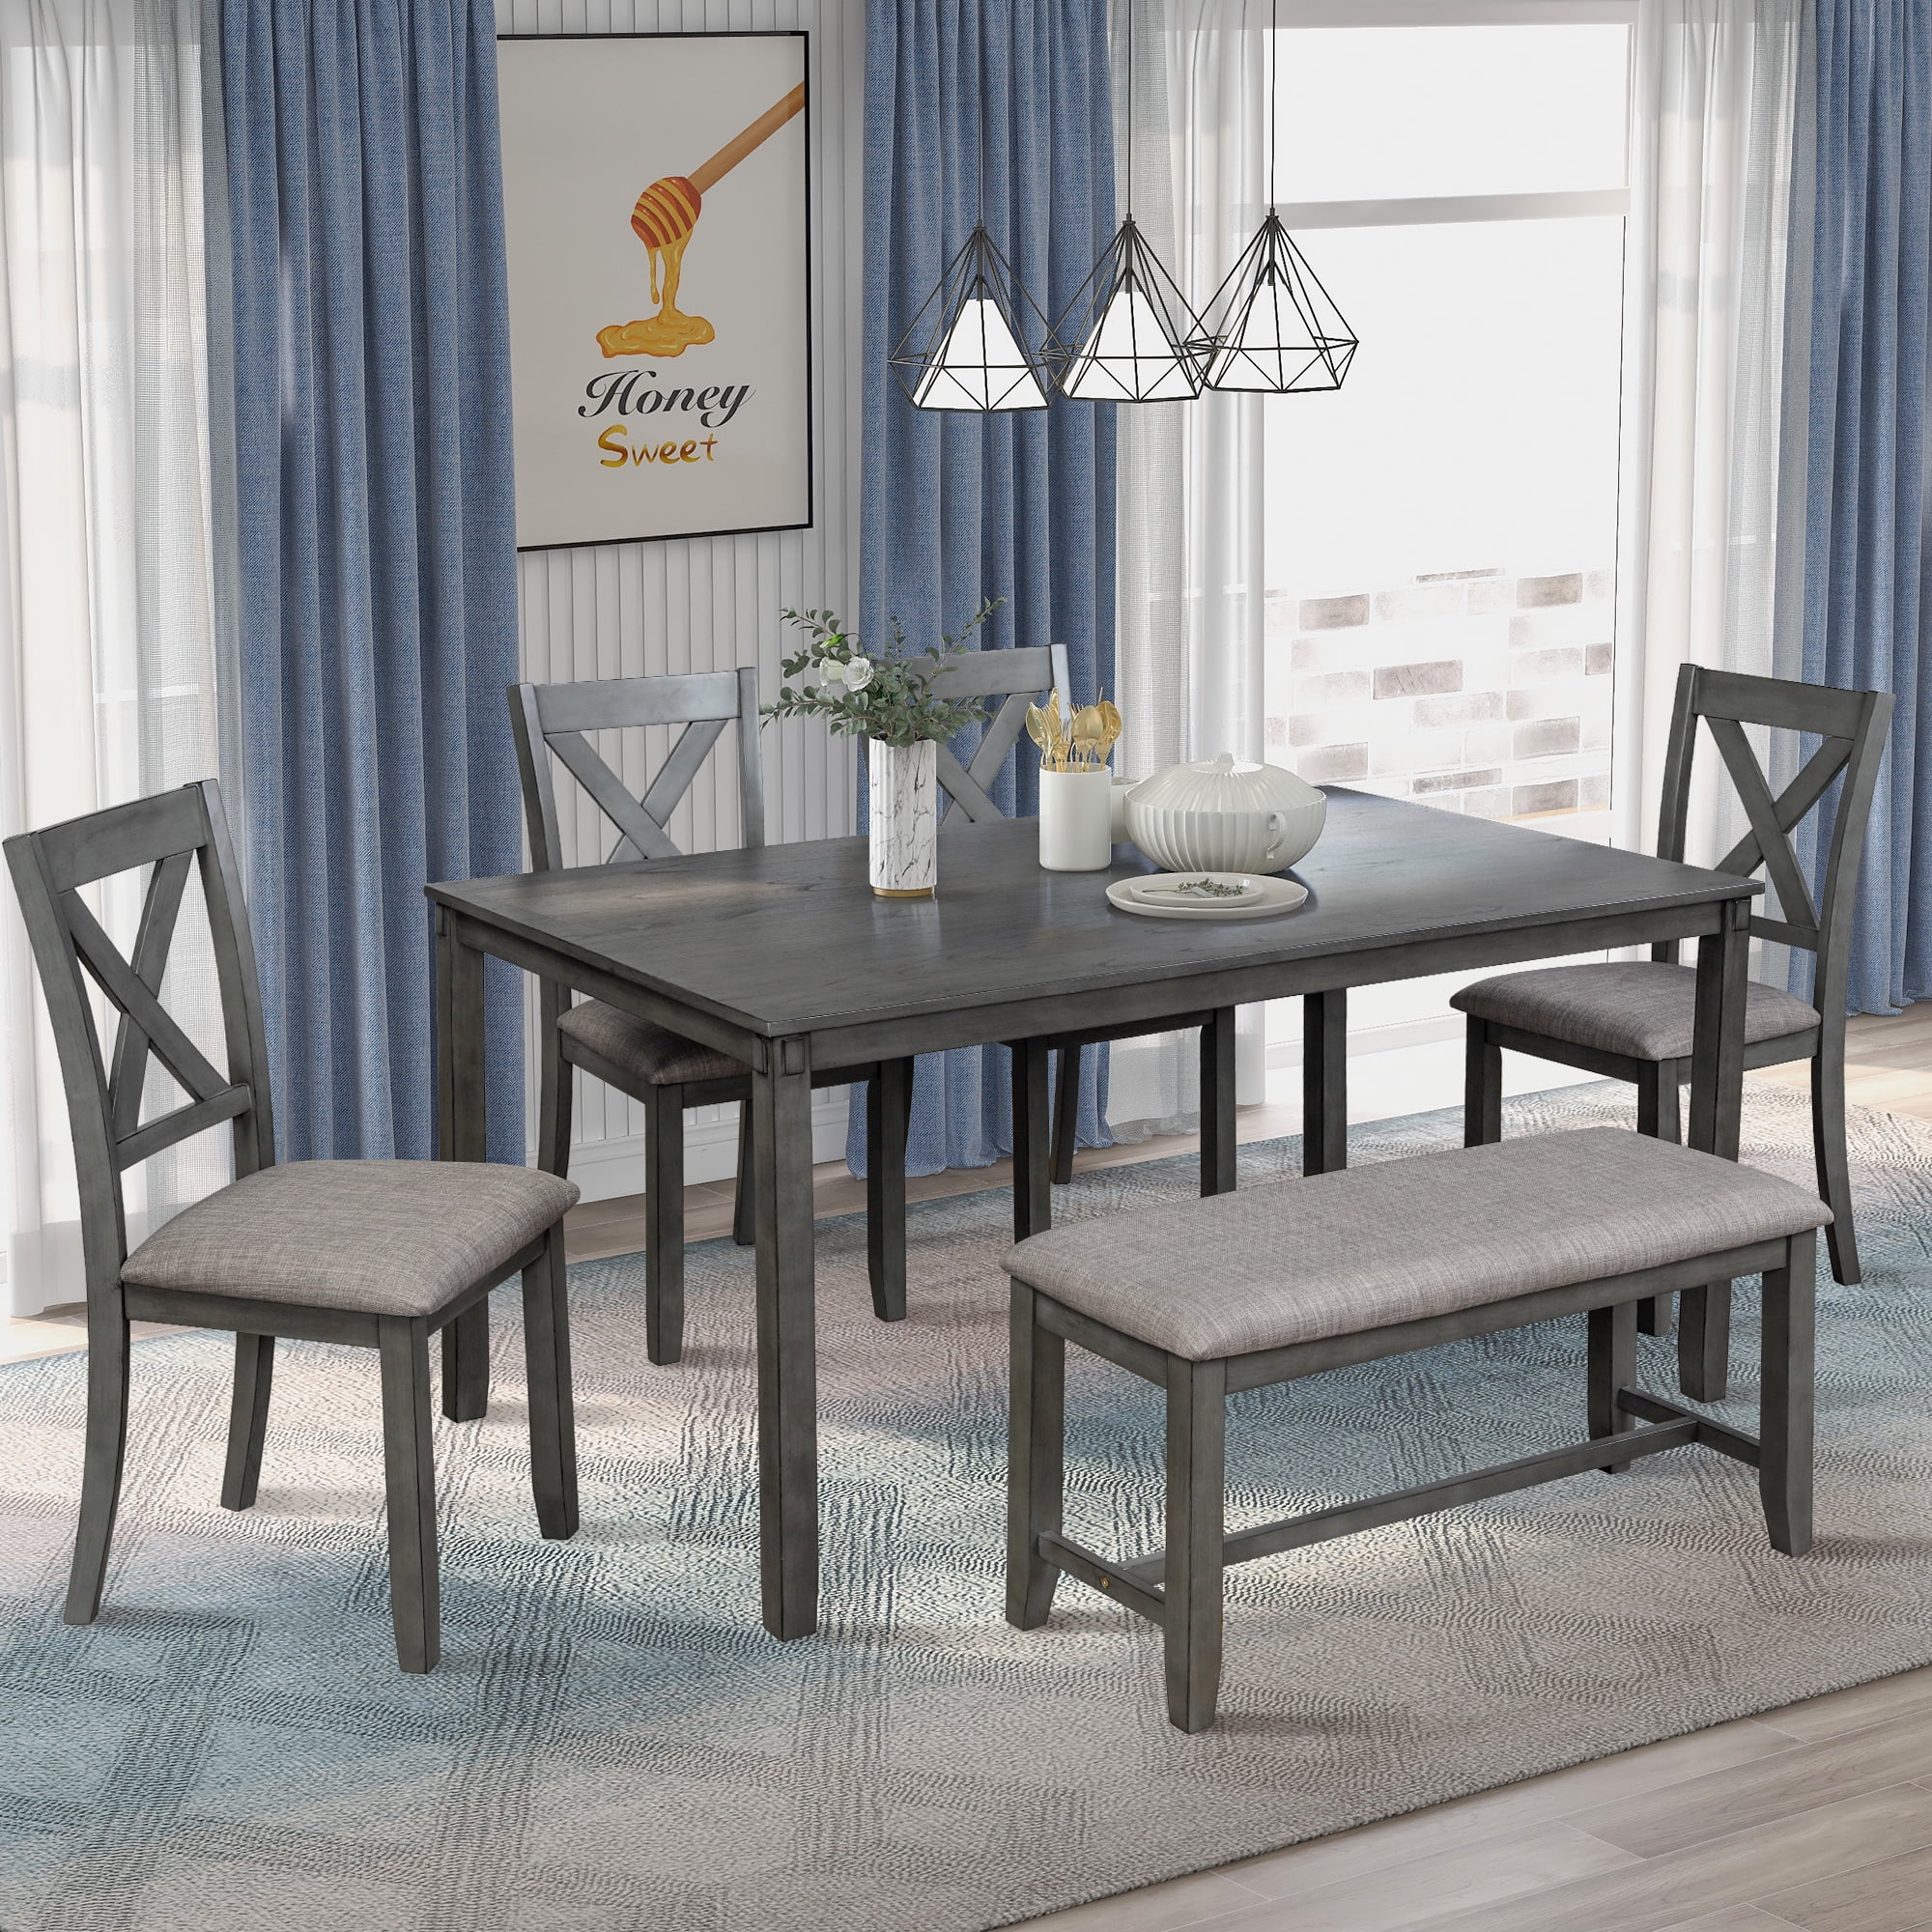 6 Piece Dining Table Set Modern Home, Dining Table Bench And Chair Set